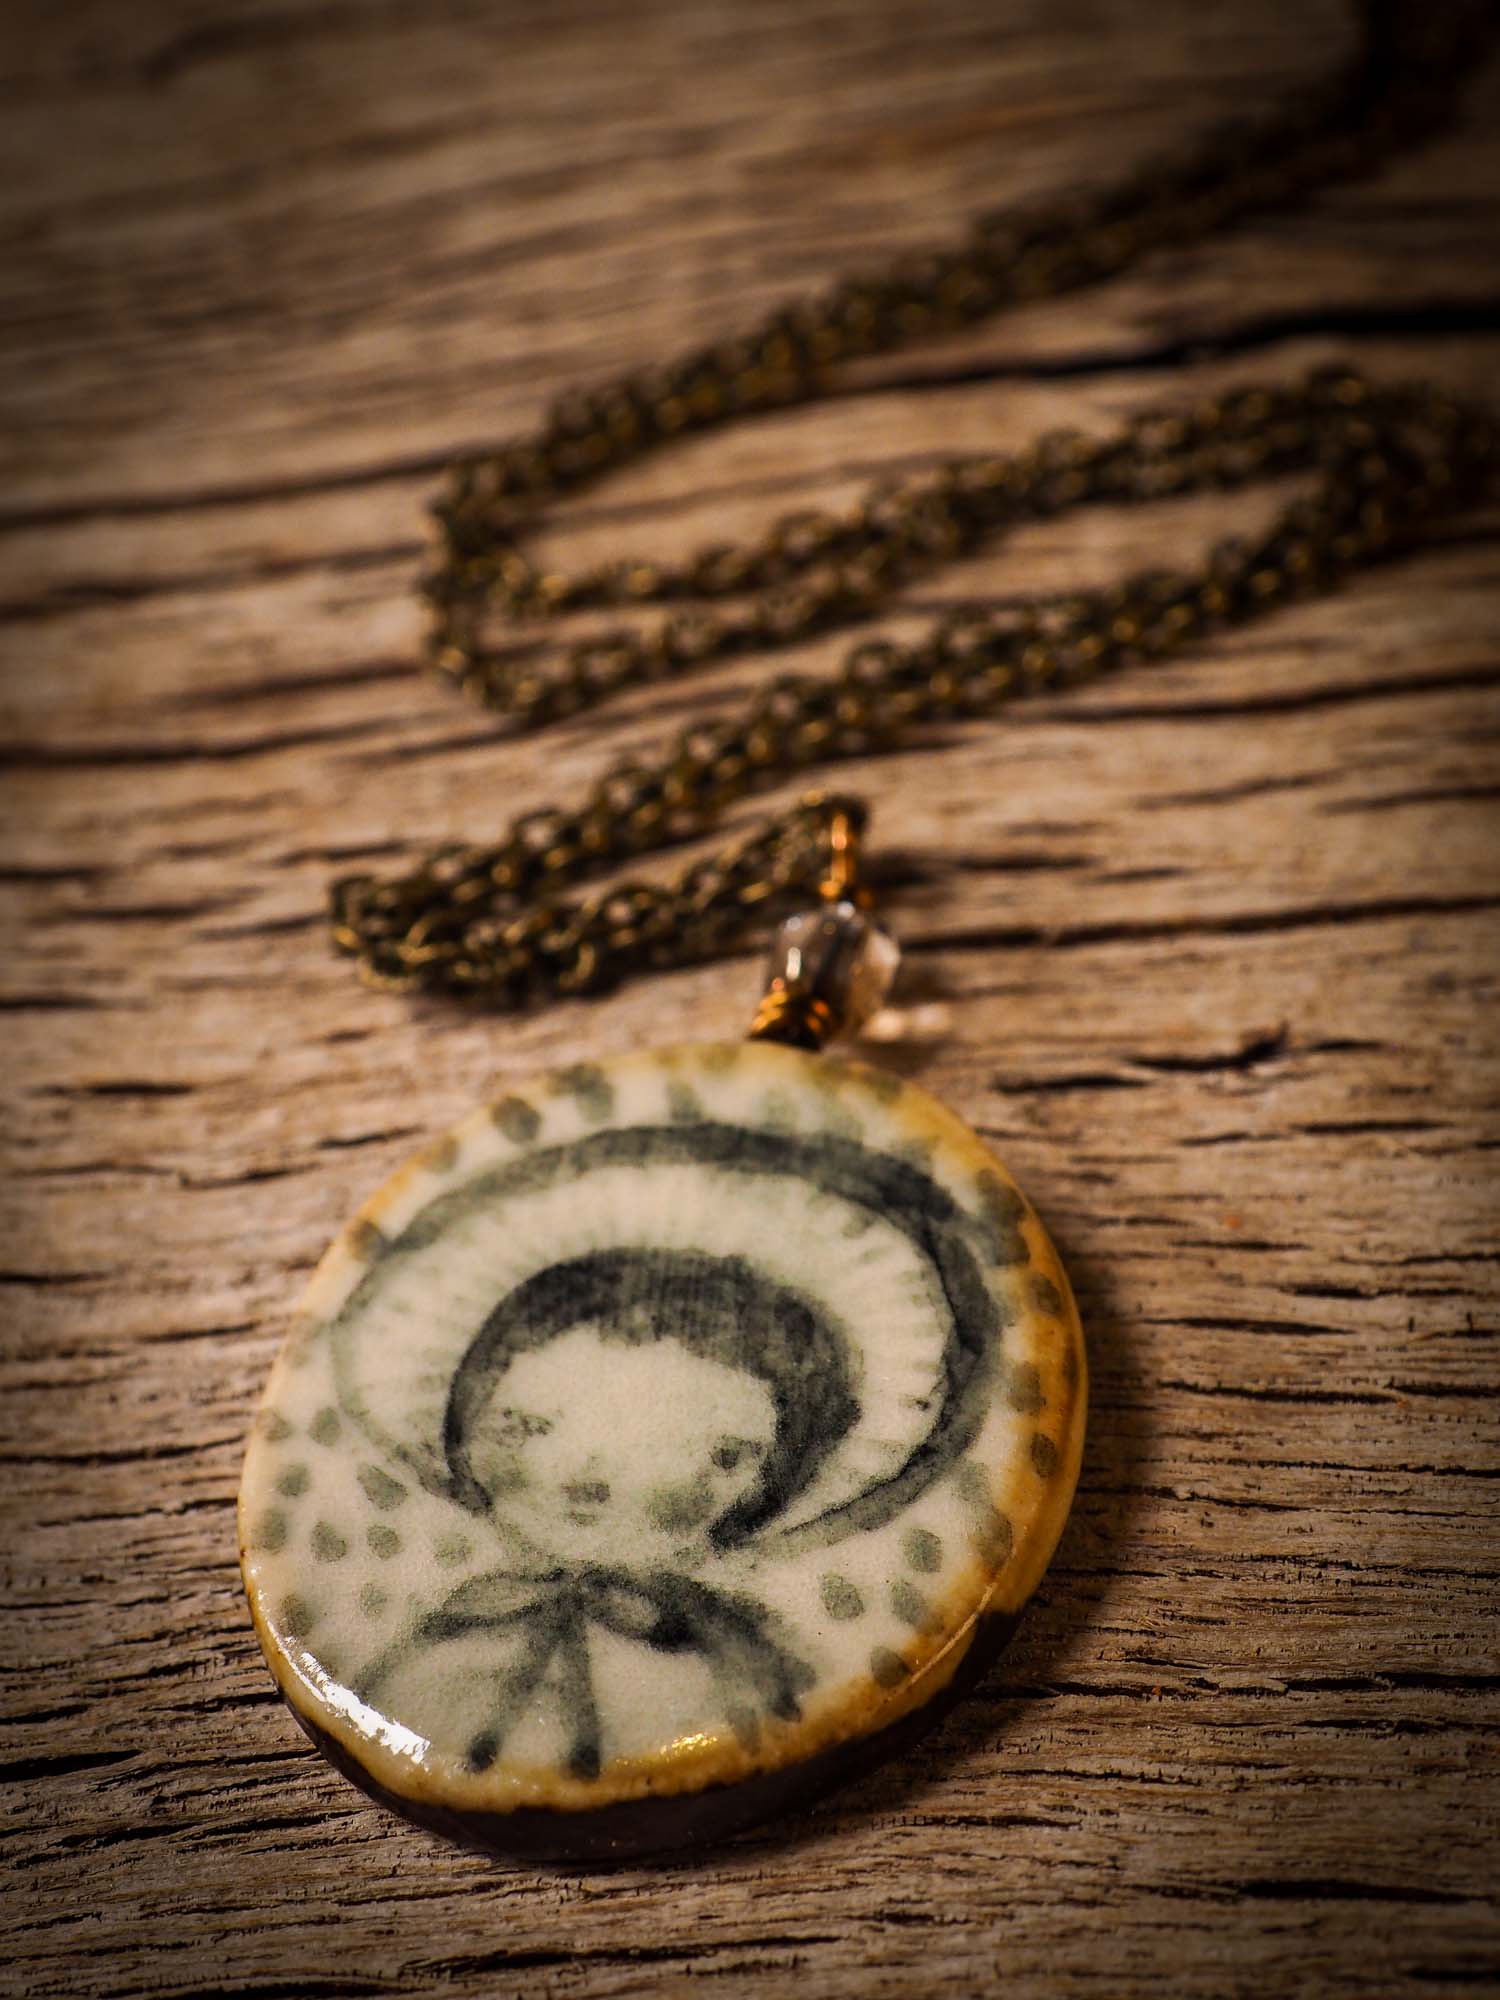 Unique fired ceramic porcelain necklace oval pendant by Idania Salcido, the artist behind Danita Art. Each jewelry setting is hand drawn and illustrated by the artist in her art studio, perfect for any dressing style. A casual gathering with friends or a fancy formal dinner, this necklace is a perfect fashion accessory